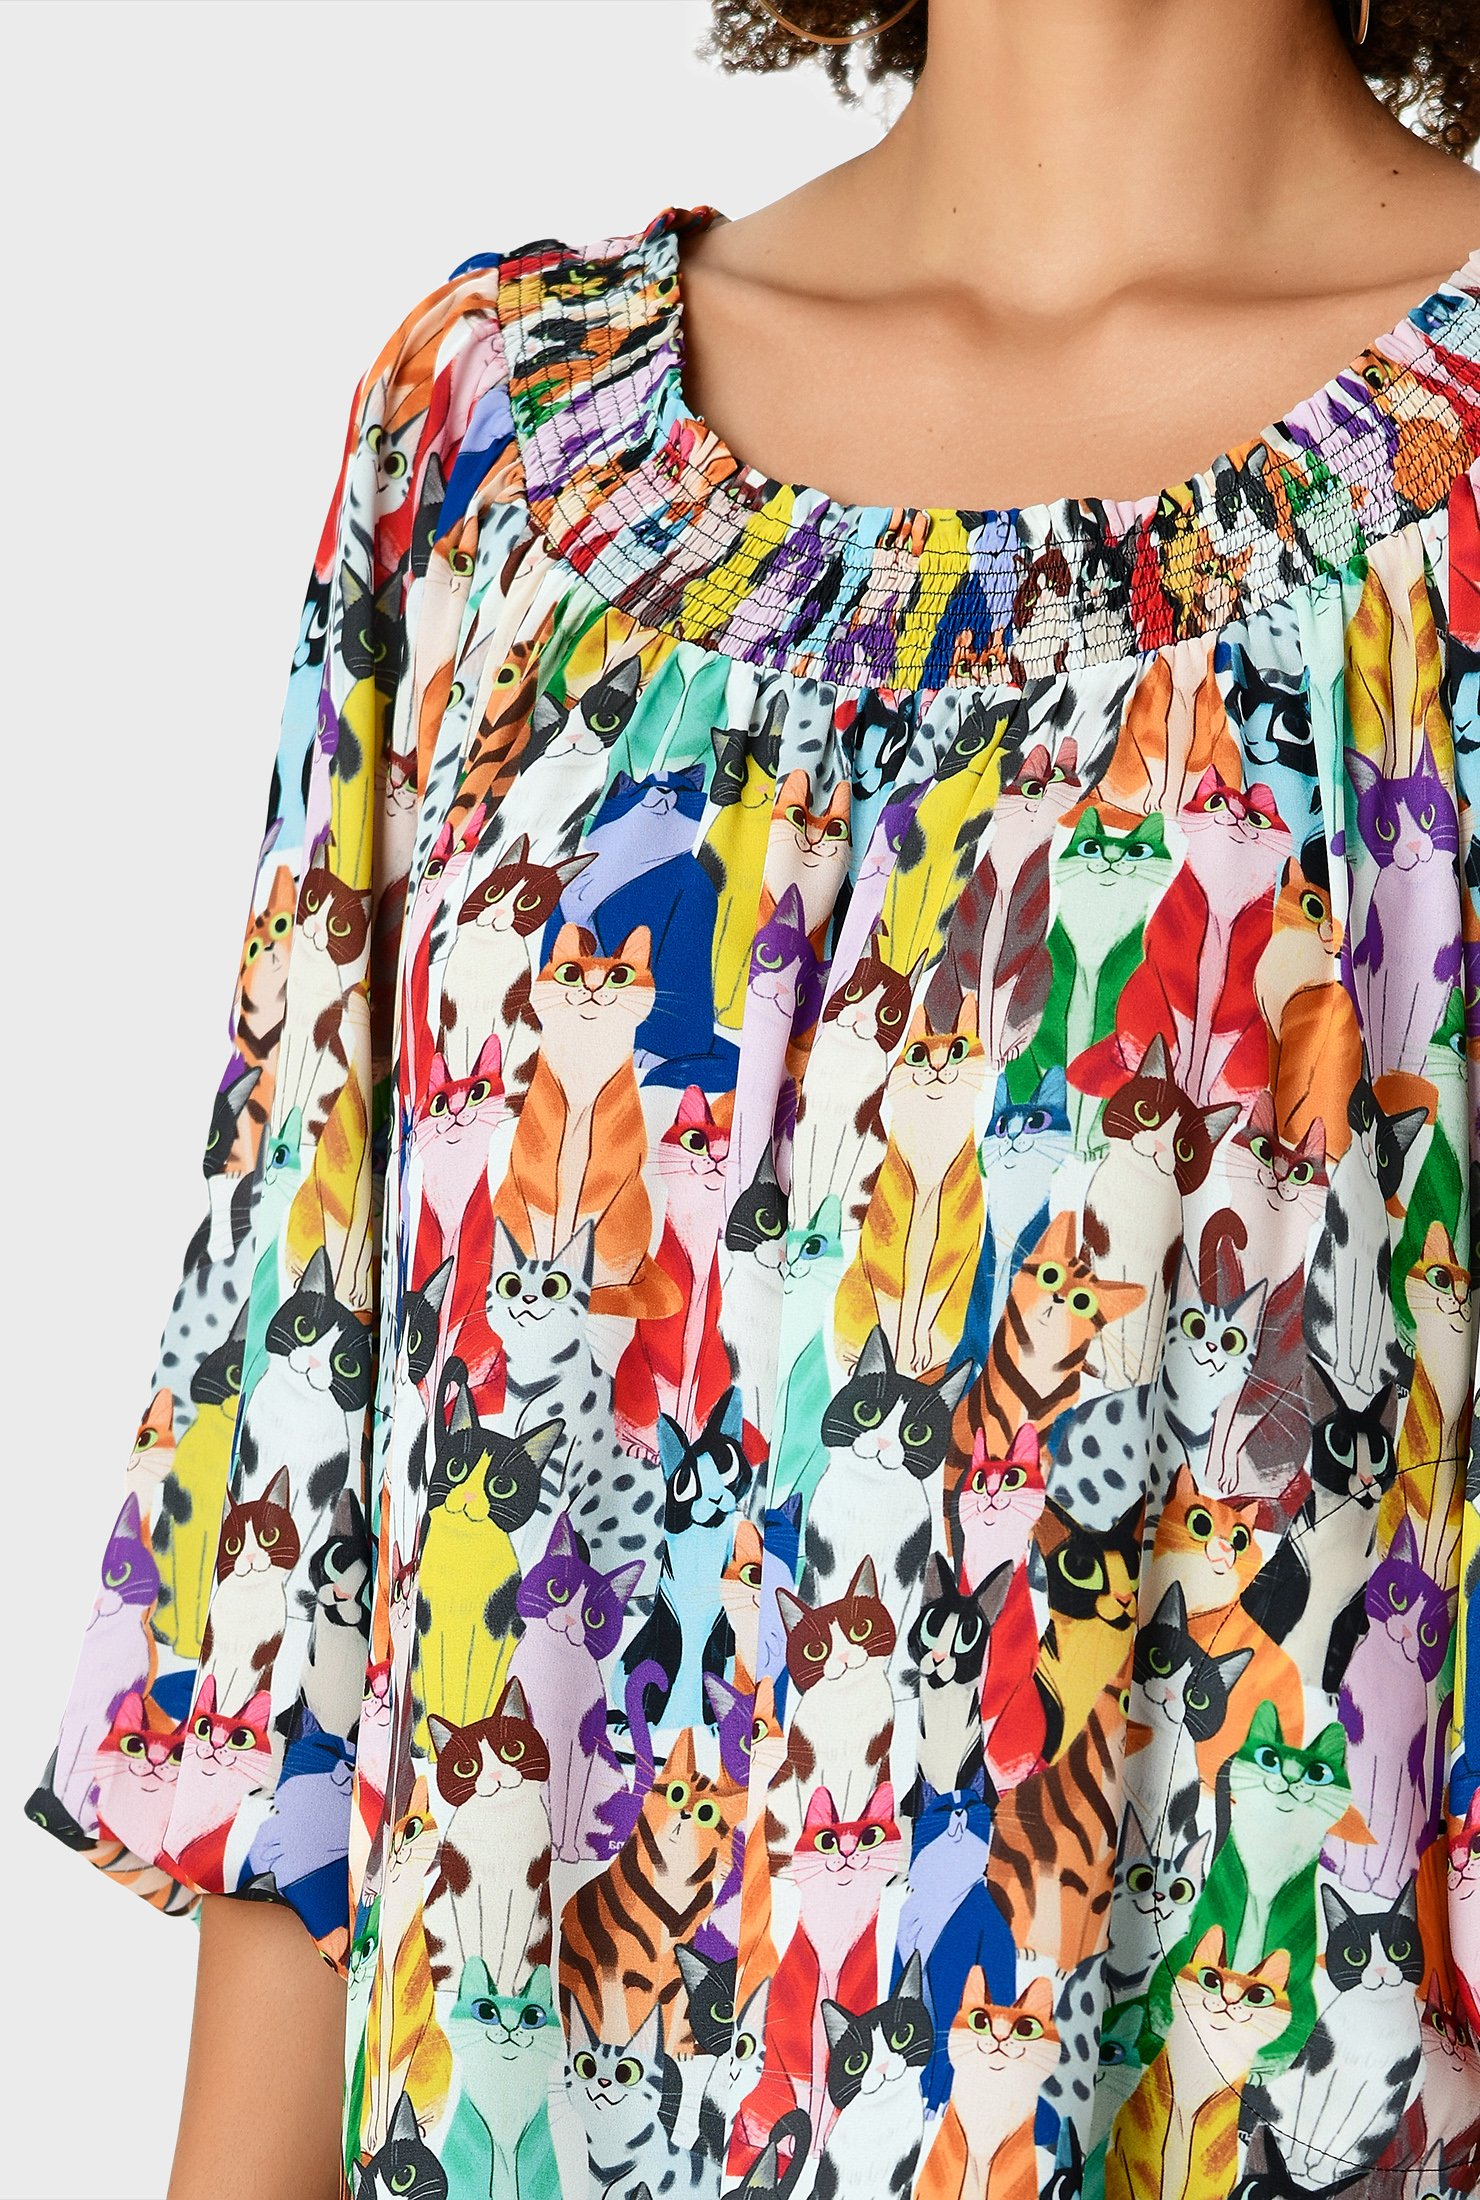 Colorful allover cats brighten our blousy top styled with an elastic-smocked neckline and puffed sleeves.